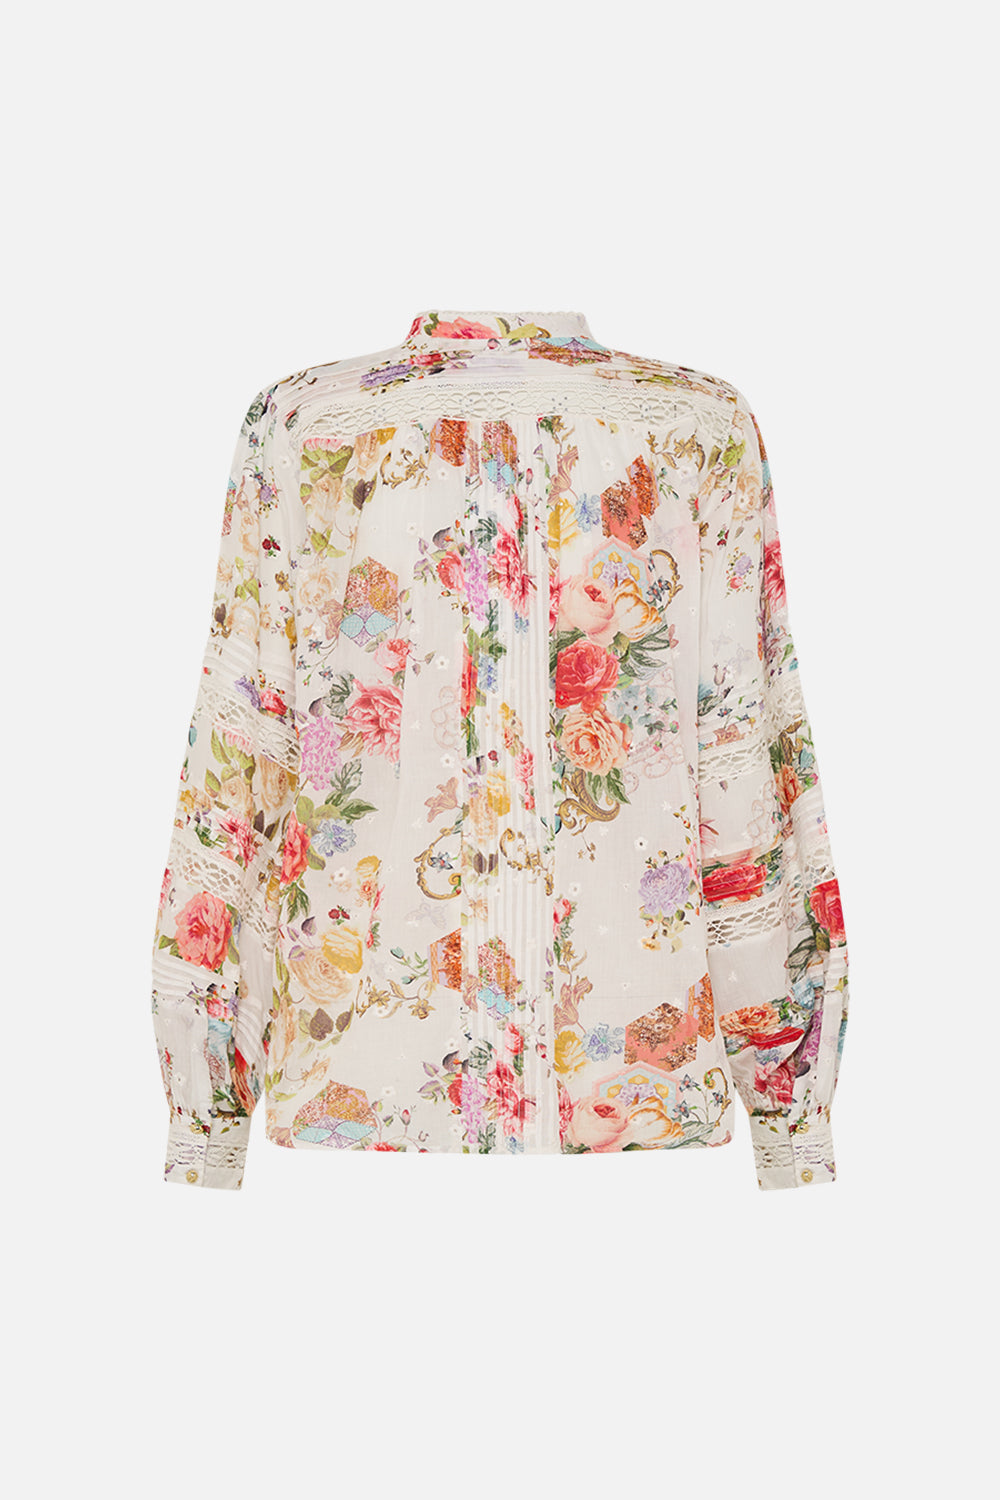 CAMILLA floral blouson sleeve blouse with yoke and pintucks in Sew Yesterday print.